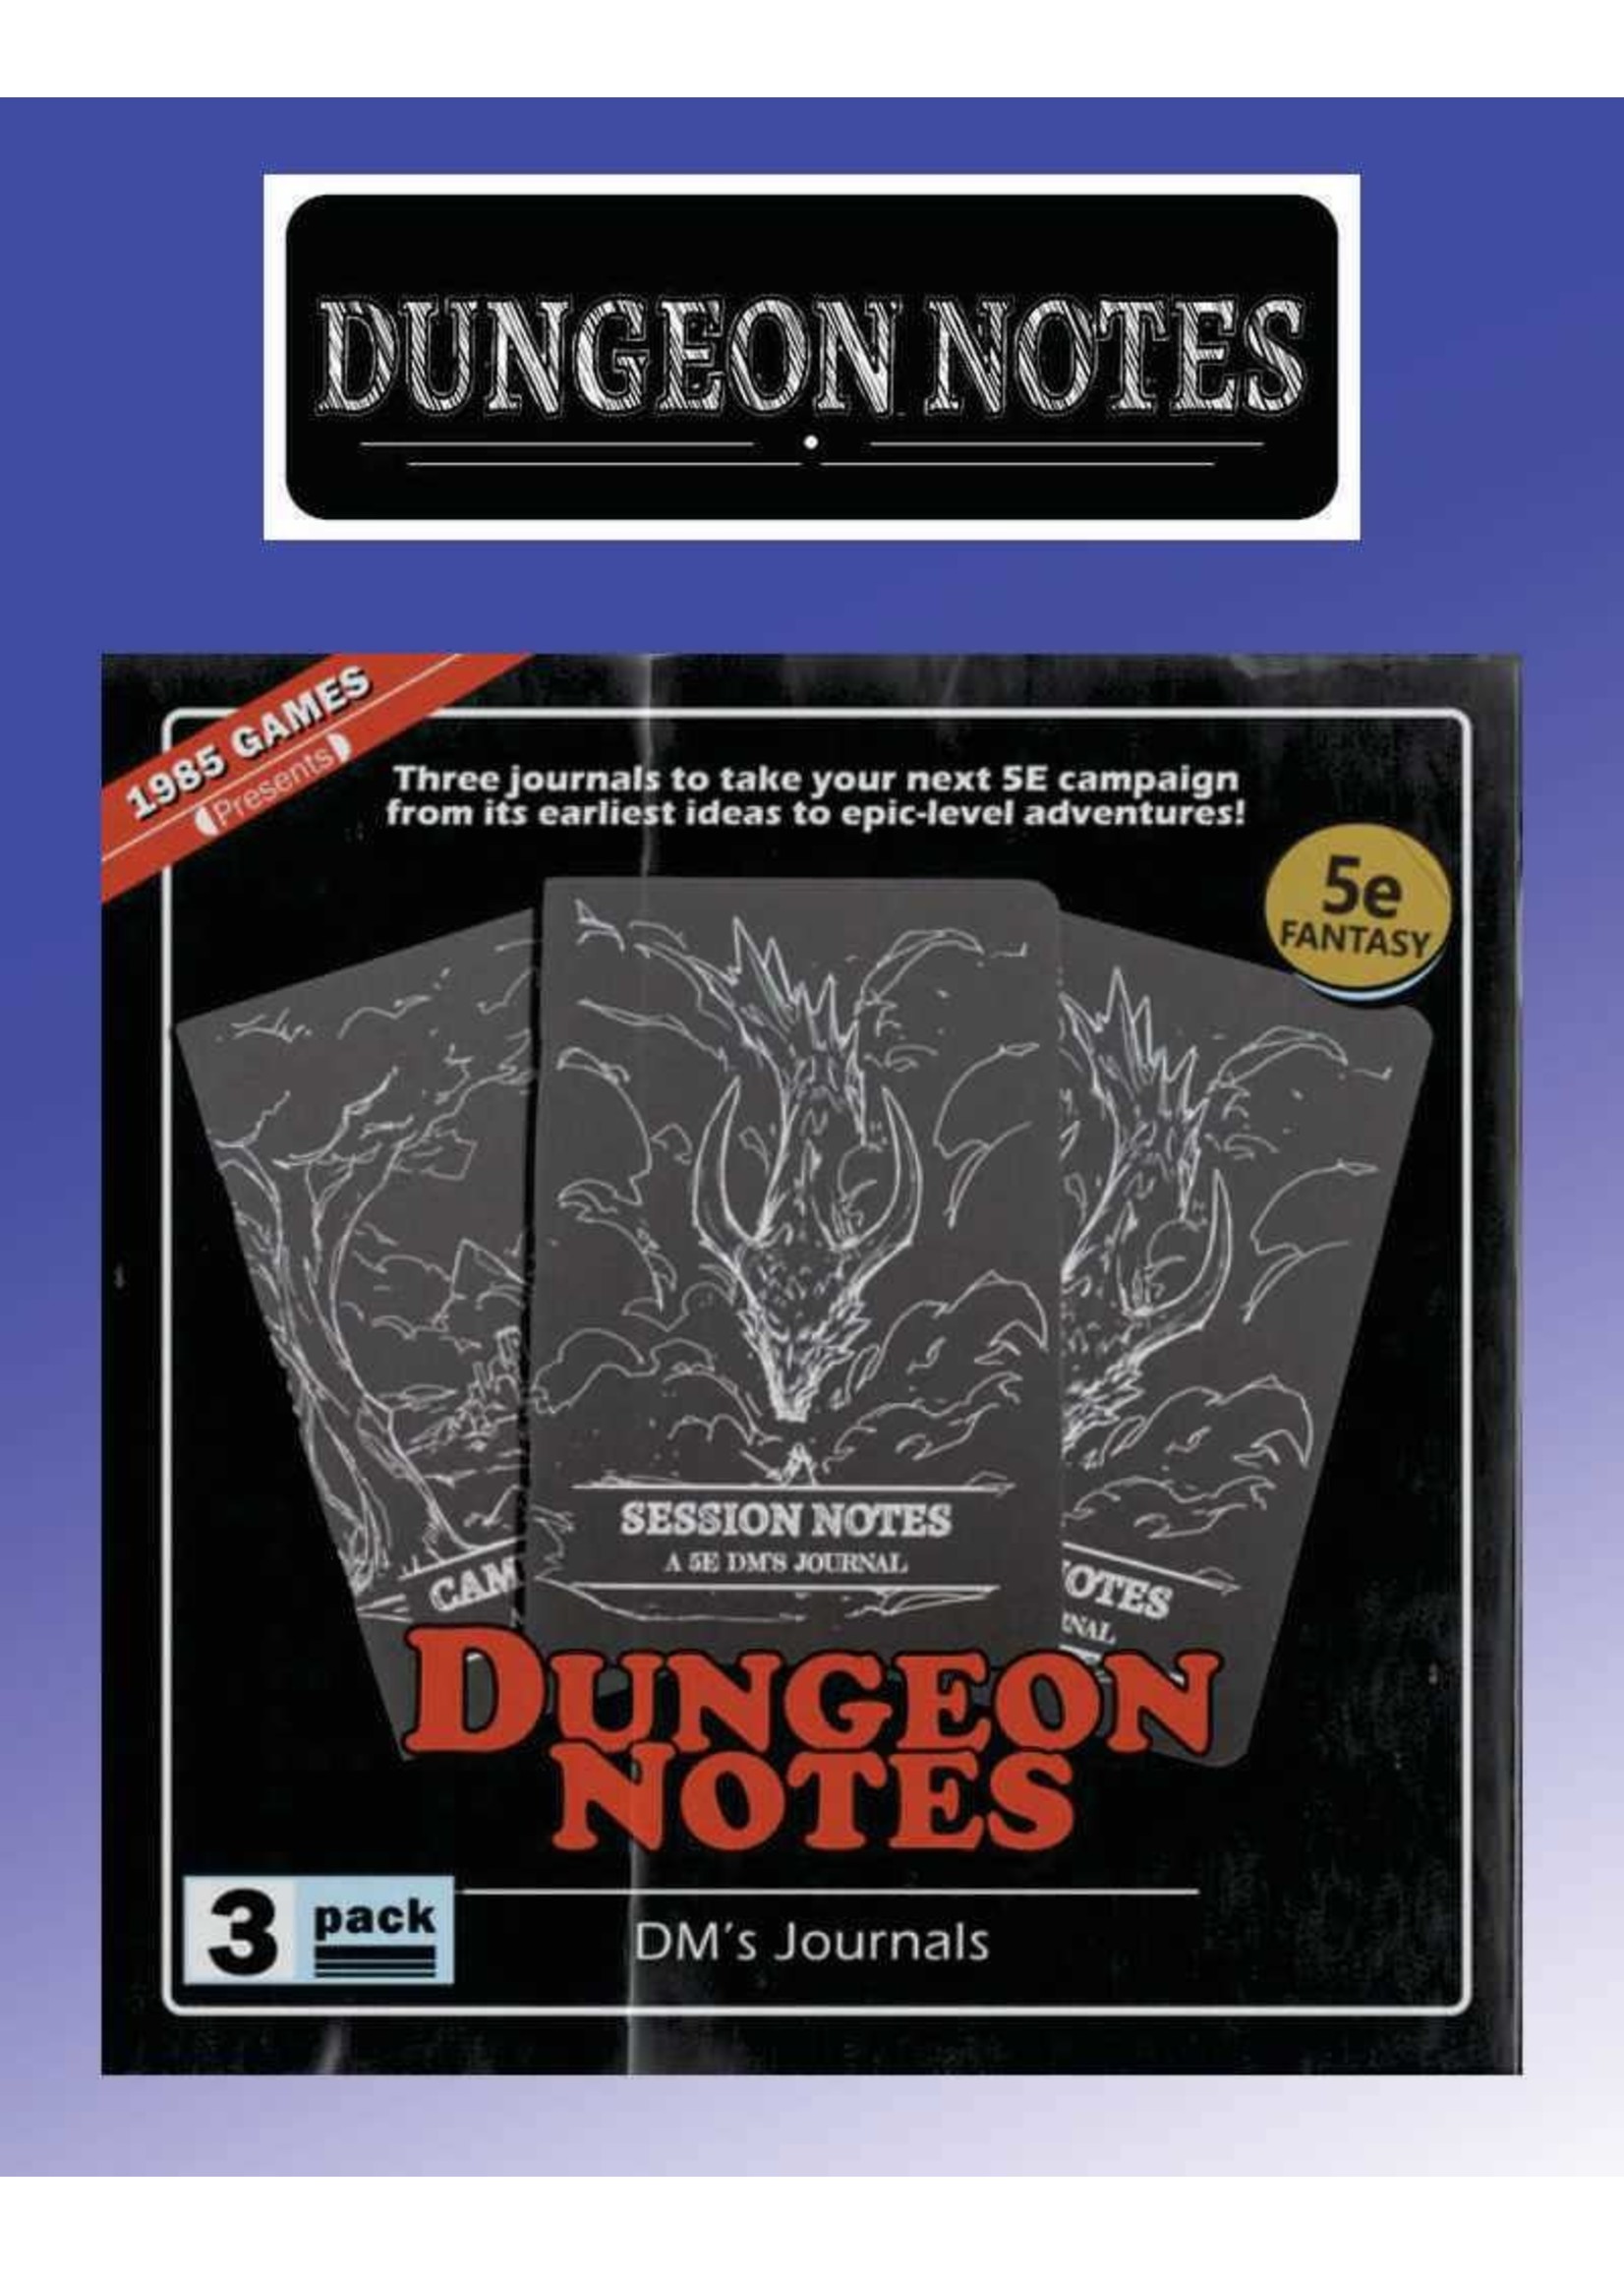 Dungeon Notes Dungeon Notes 5E DM's Journal